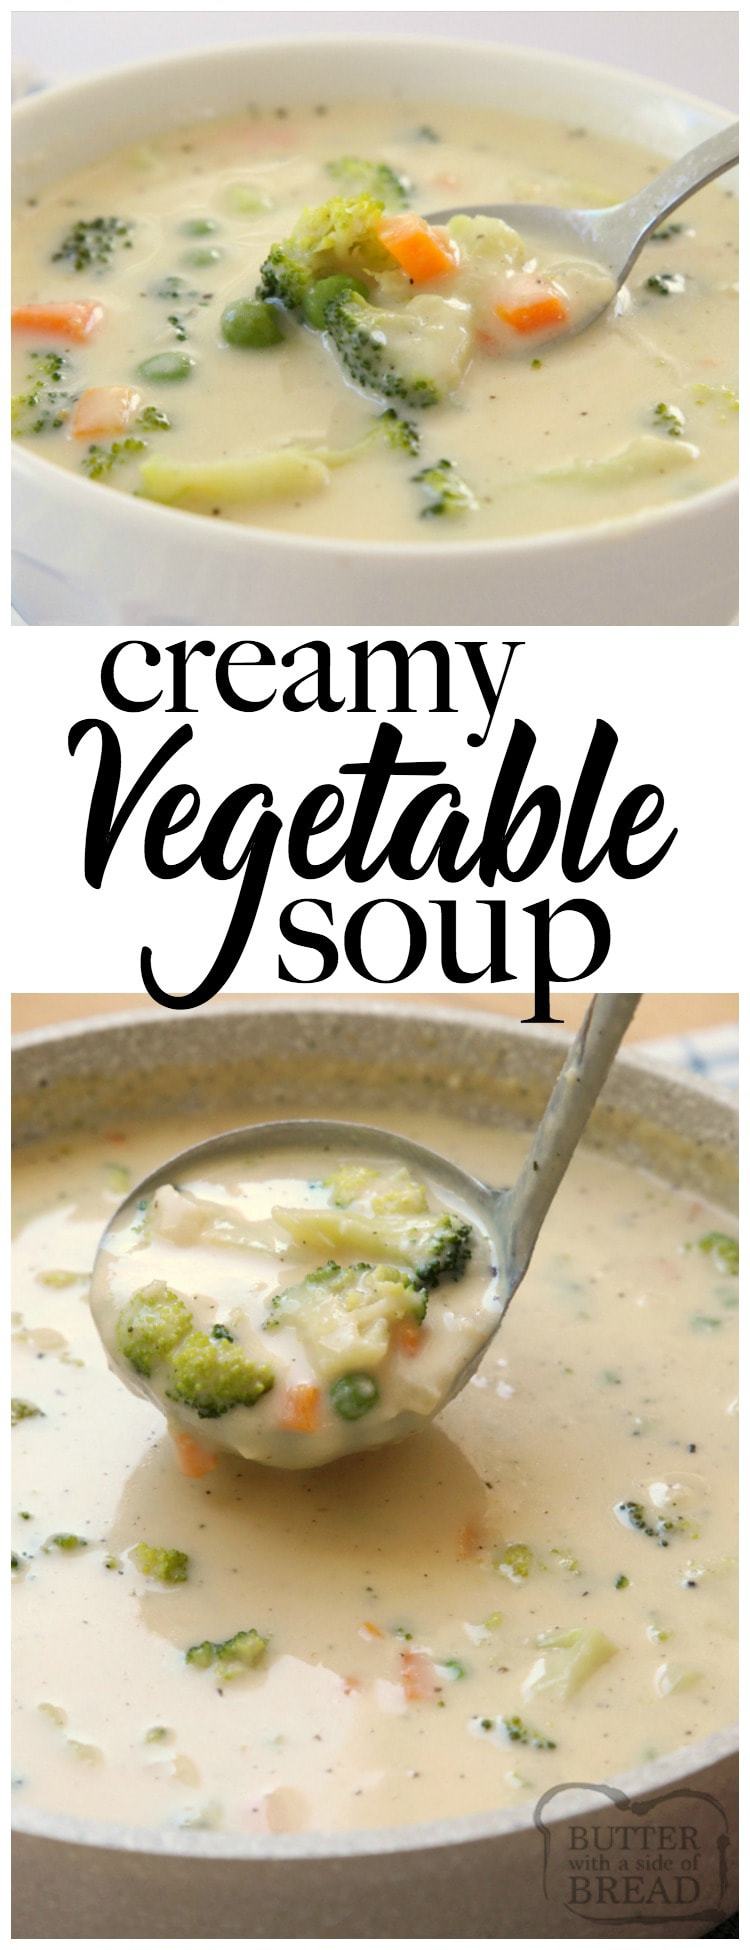 Creamy Vegetable Soup is simply made in 30 minutes or less! This Vegetable Soup recipe is a flavorful and comforting soup, it is perfect for cold nights in the fall and winter.